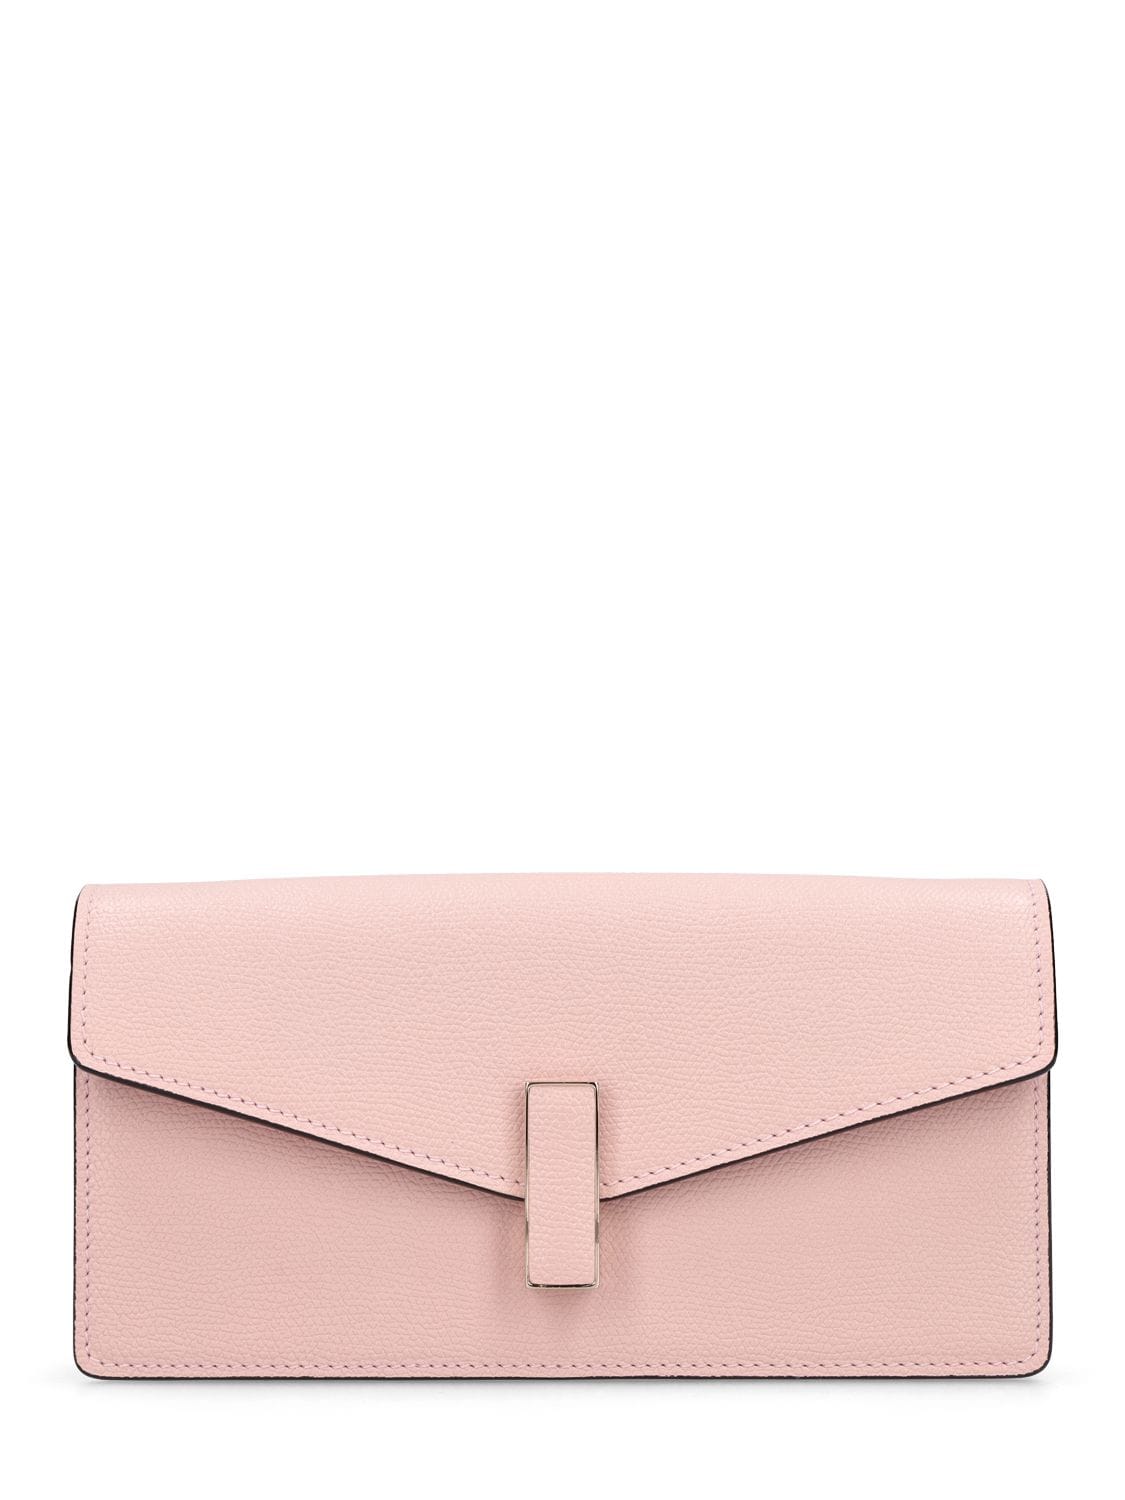 Valextra New Iside Clutch W/chain In Peonia